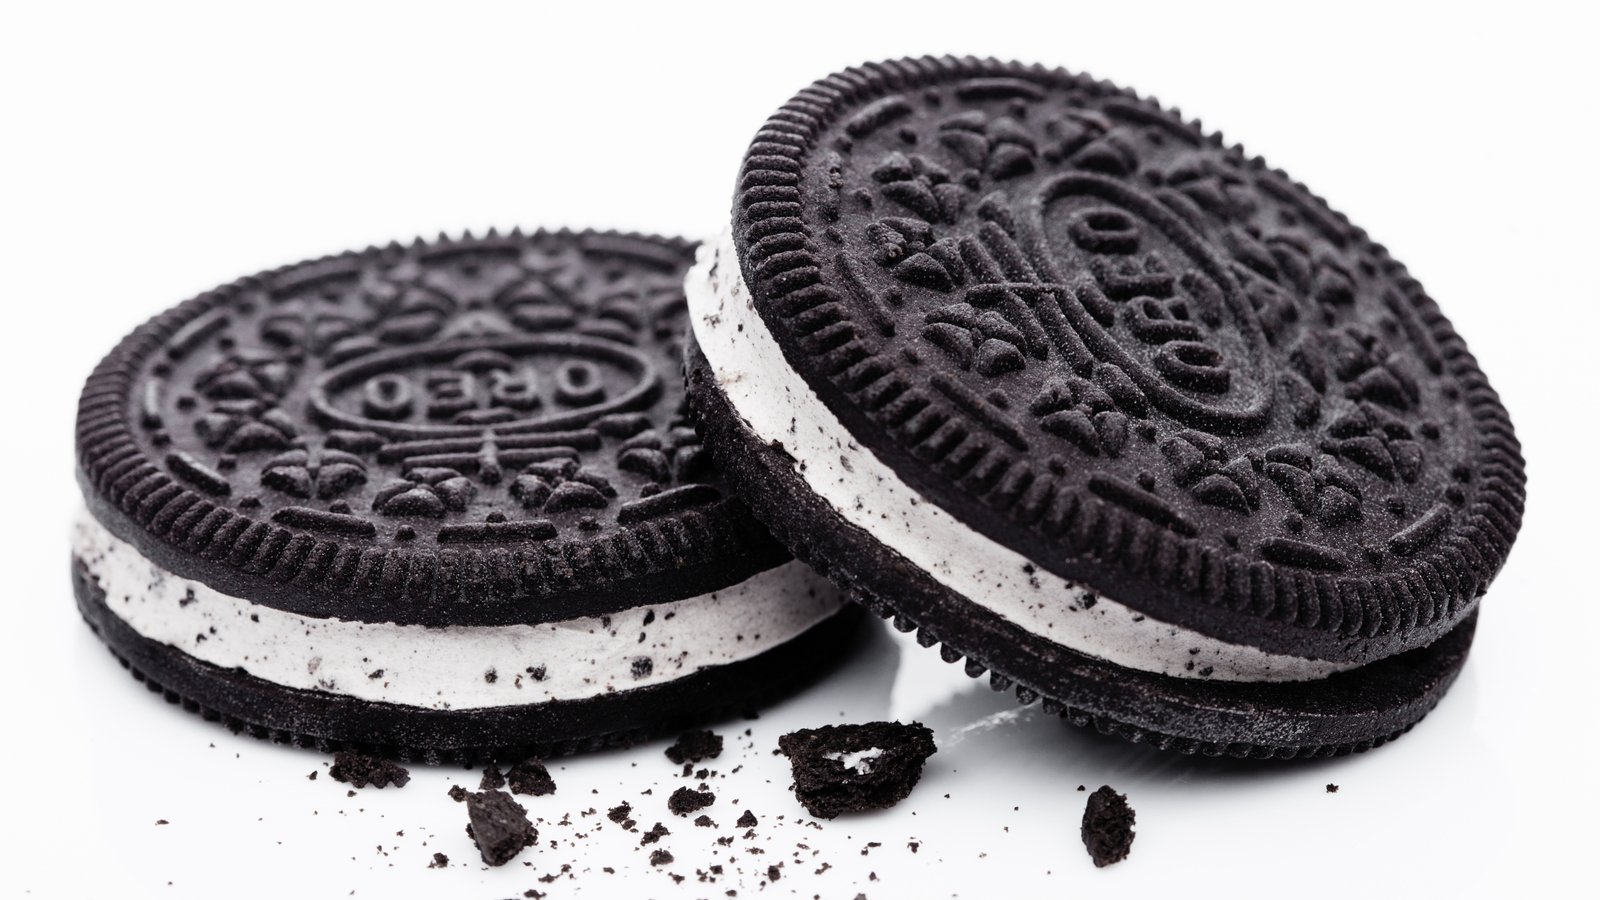 Oreo Mystery Flavor 2019: Guess It and You Could Win $50K! | InvestorPlace